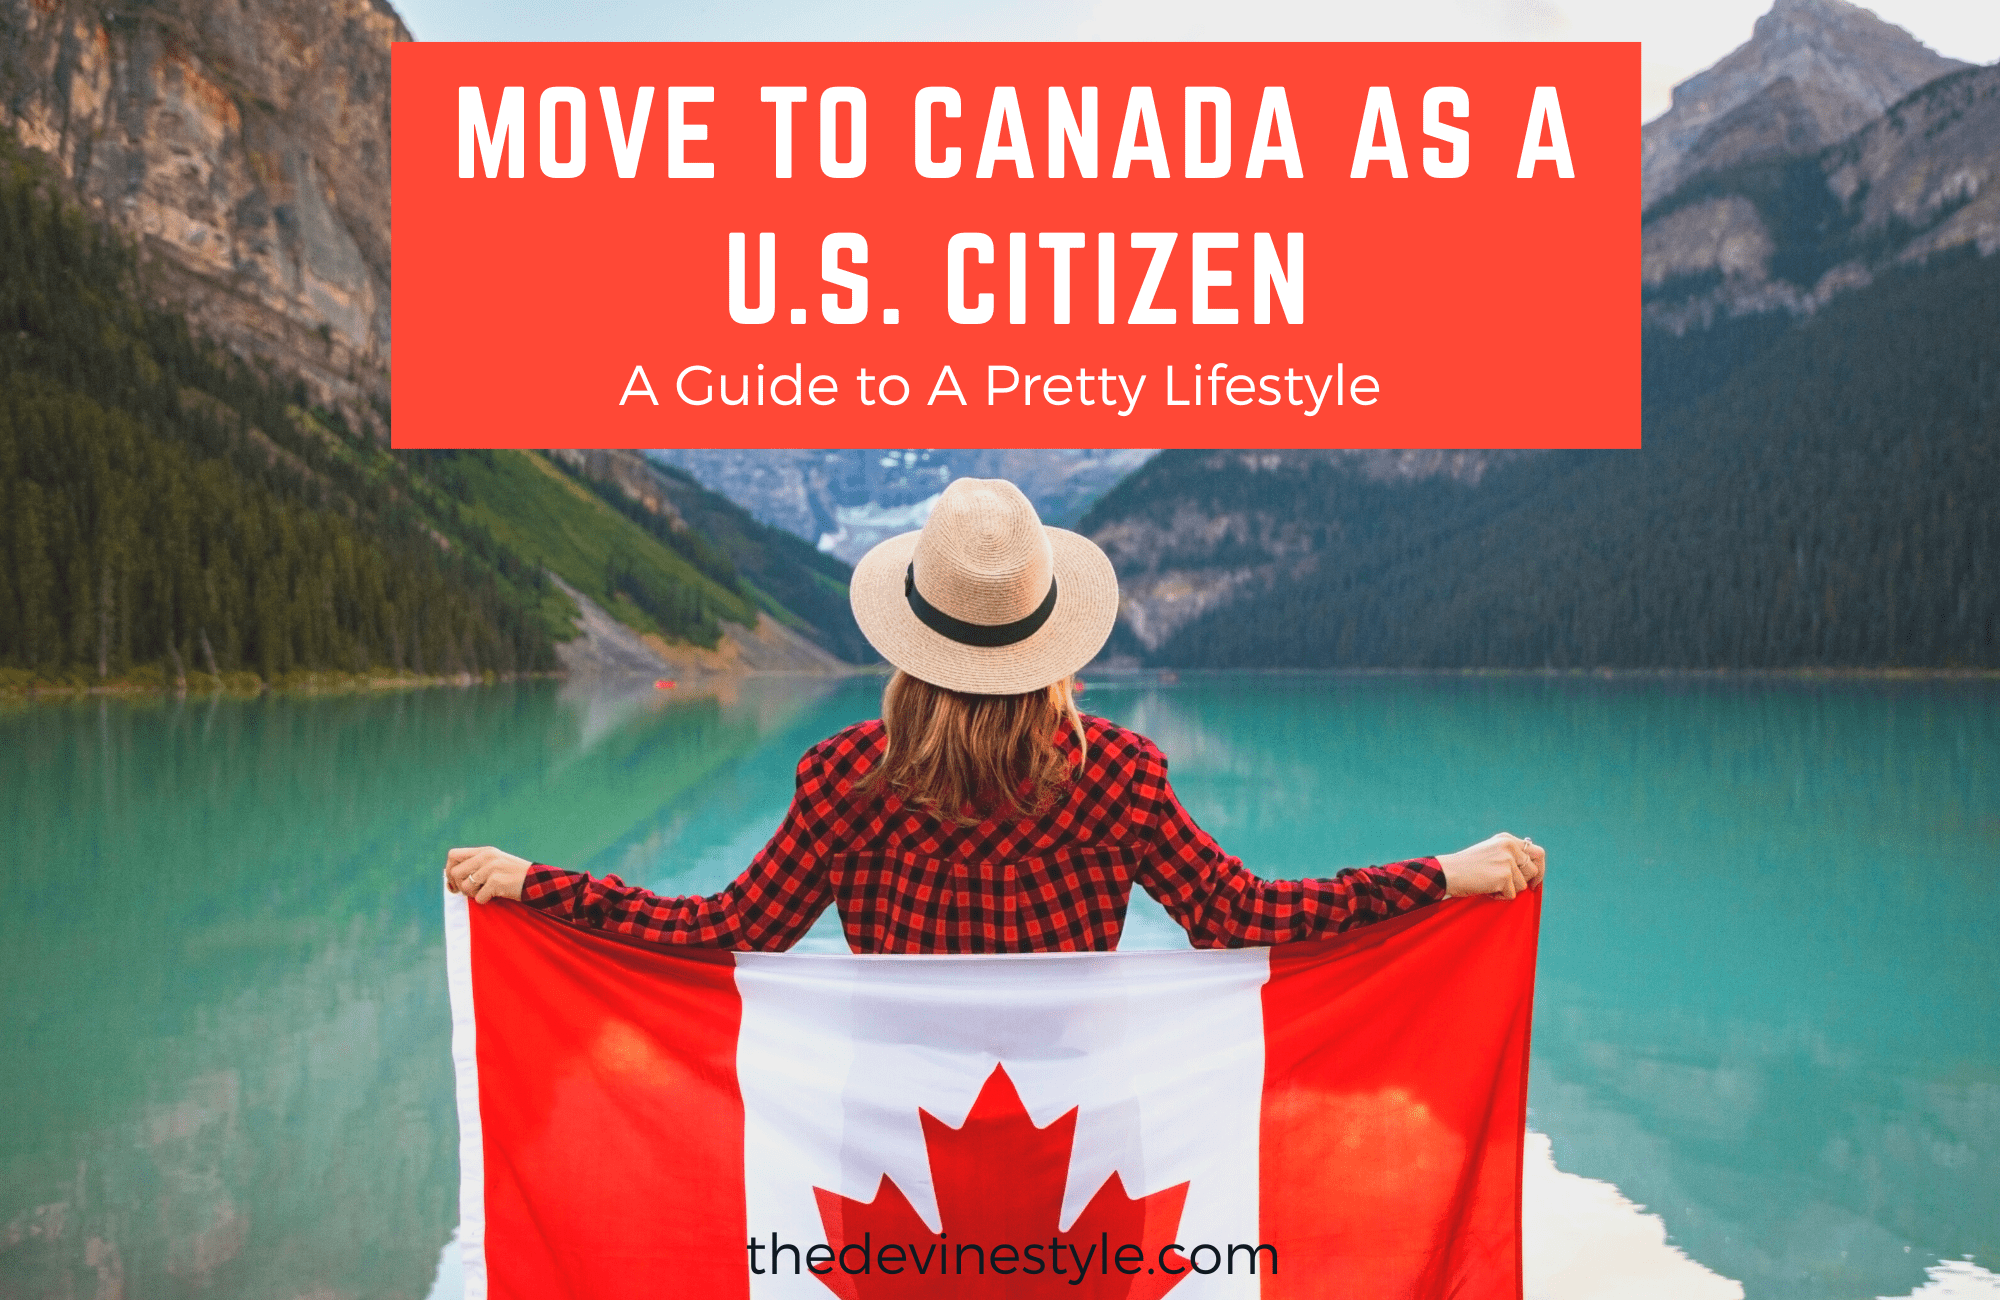 Move to Canada as a U.S. Citizen A